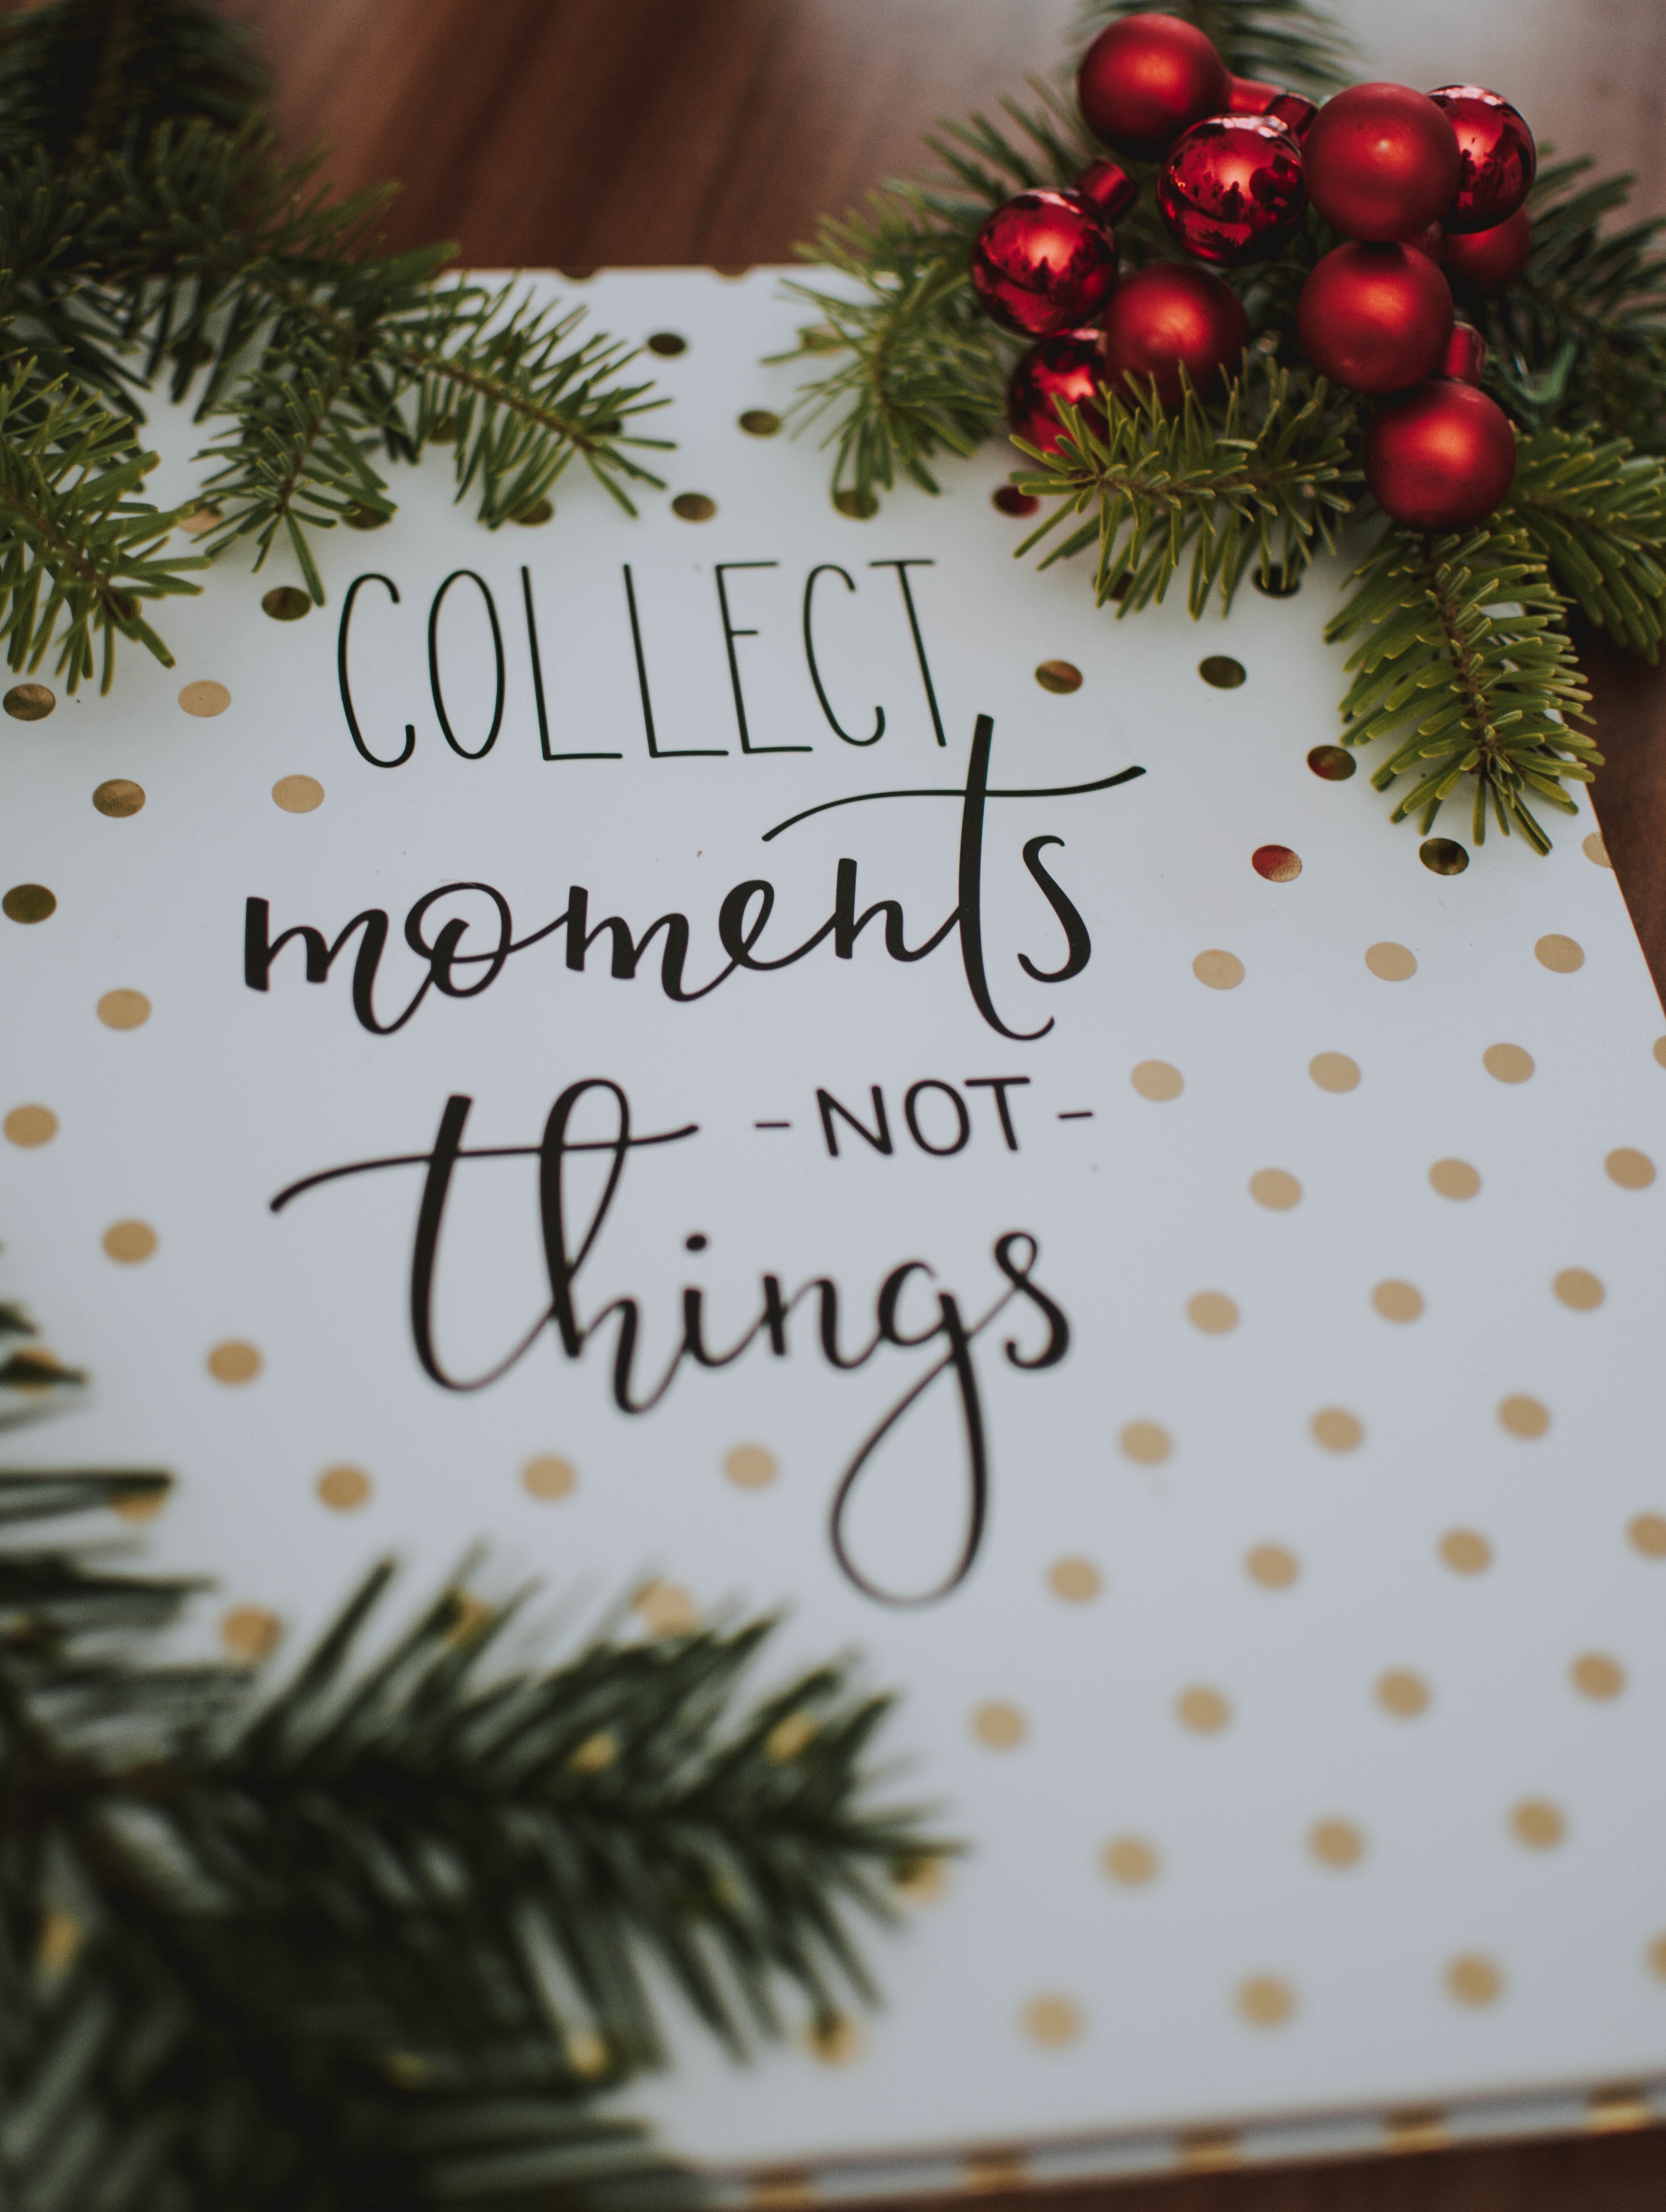 "Collect moments, no things" Christmas card | Photo: Pexels.com